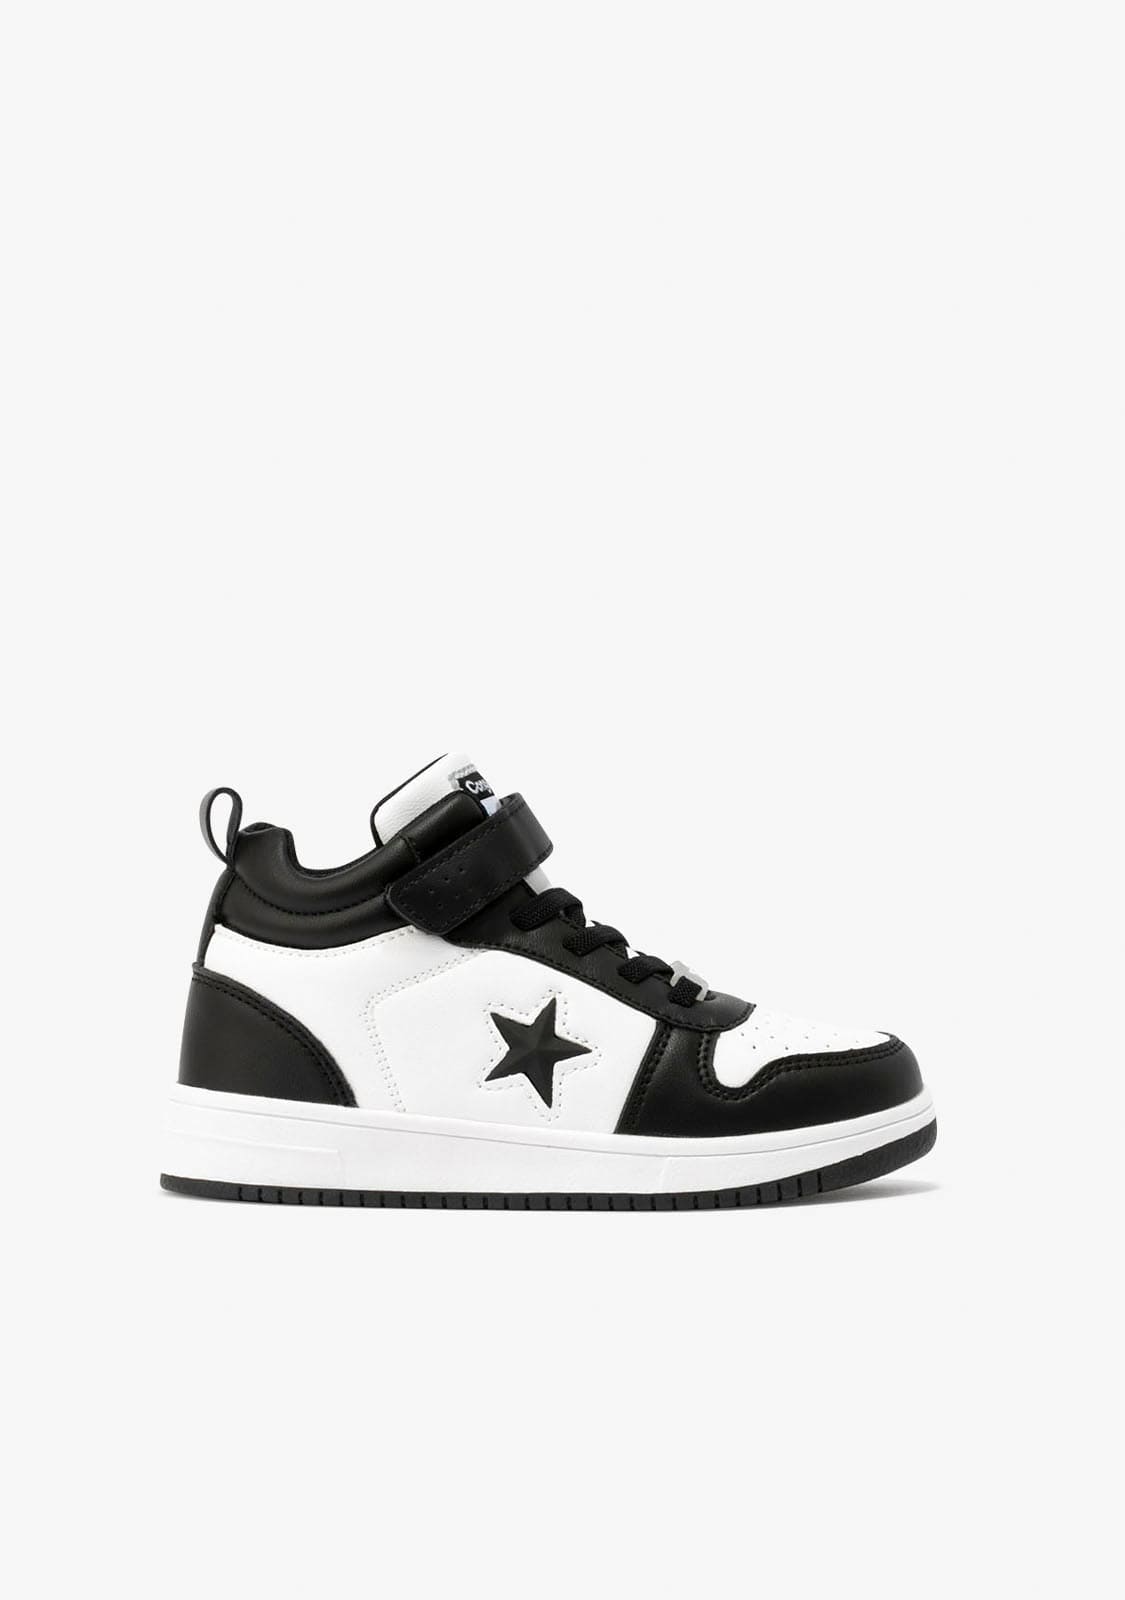 CONGUITOS Shoes Unisex Black White With Lights Hi-Top Sneakers Napa